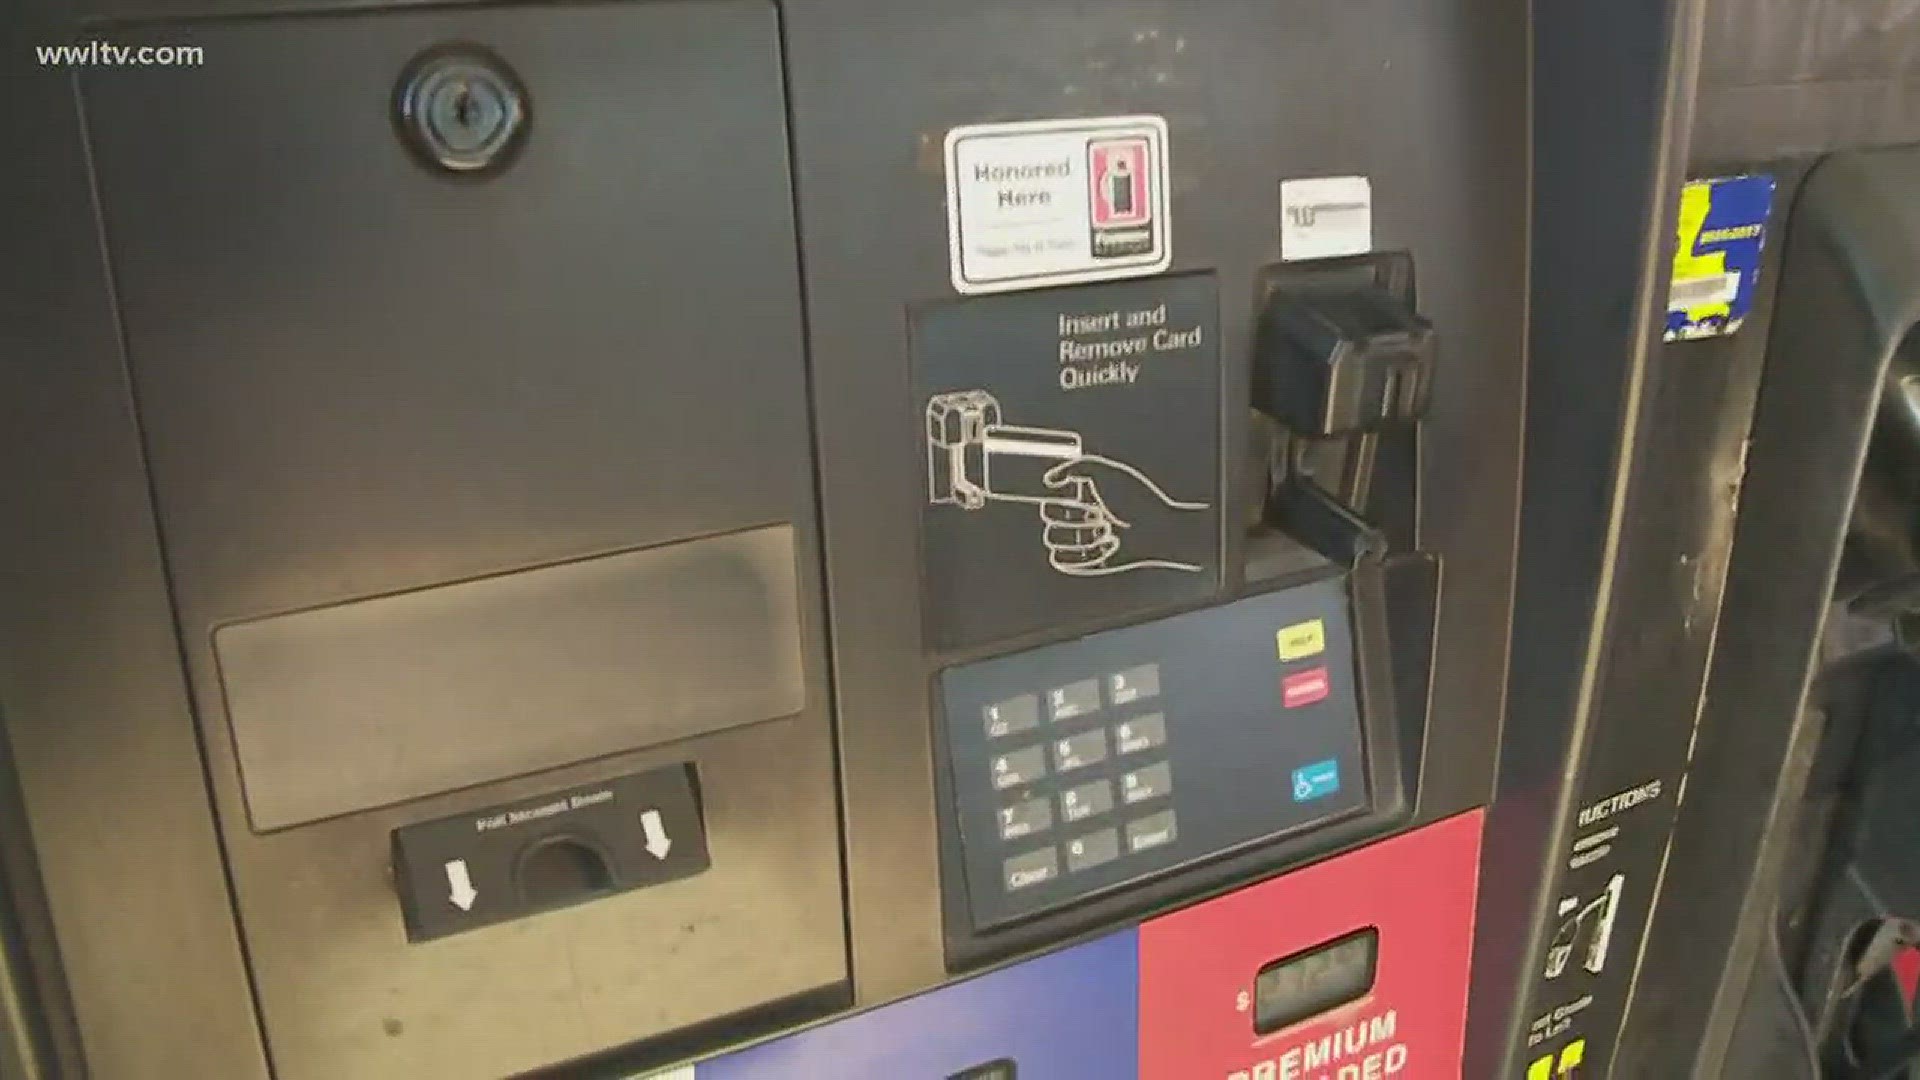 Two skimming devices were found at a very busy gas station this past weekend.